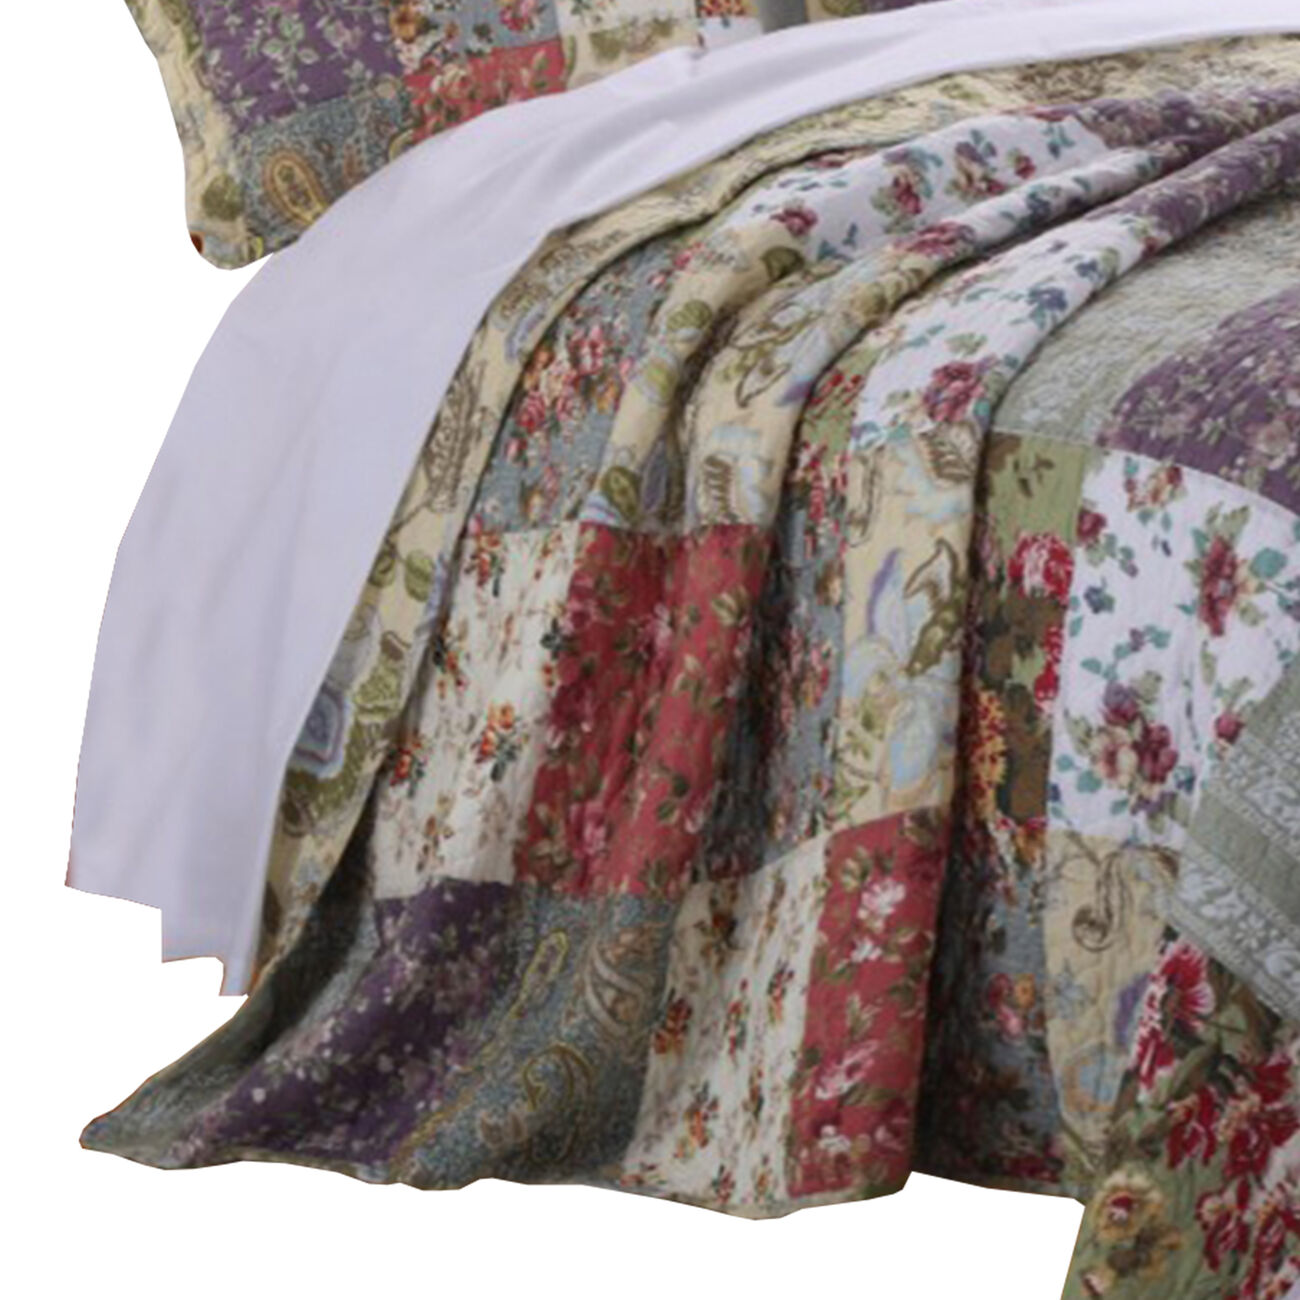 Chicago 2 Piece Fabric Twin Bedspread Set with Jacobean Prints, Multicolor